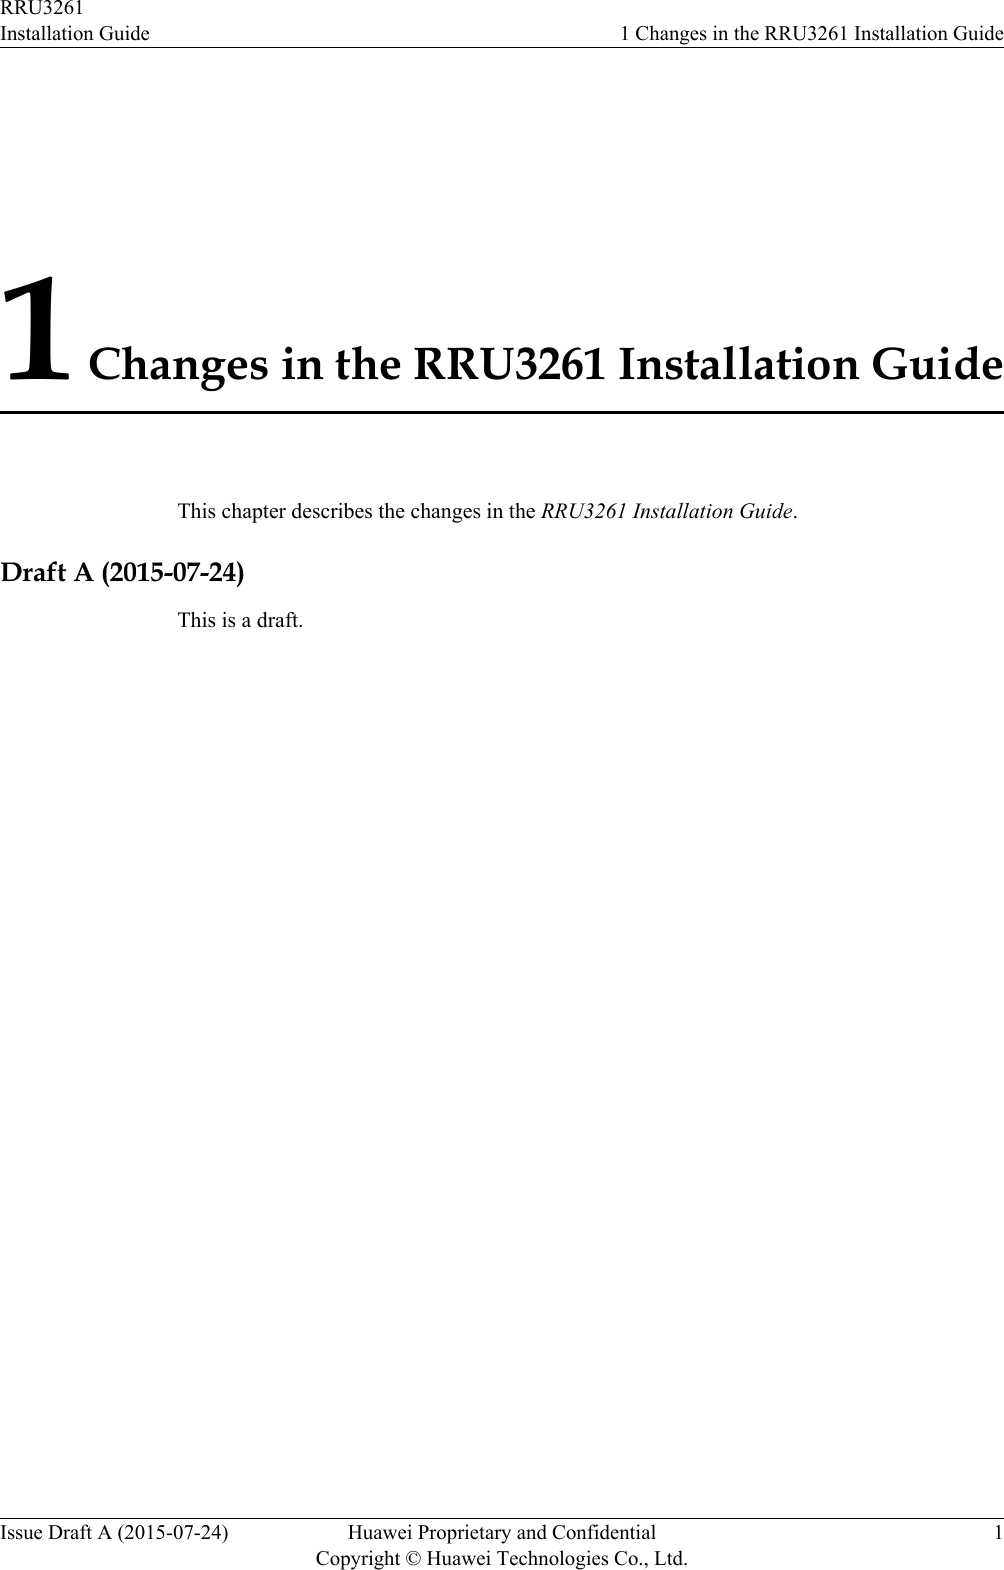 1 Changes in the RRU3261 Installation GuideThis chapter describes the changes in the RRU3261 Installation Guide.Draft A (2015-07-24)This is a draft.RRU3261Installation Guide 1 Changes in the RRU3261 Installation GuideIssue Draft A (2015-07-24) Huawei Proprietary and ConfidentialCopyright © Huawei Technologies Co., Ltd.1